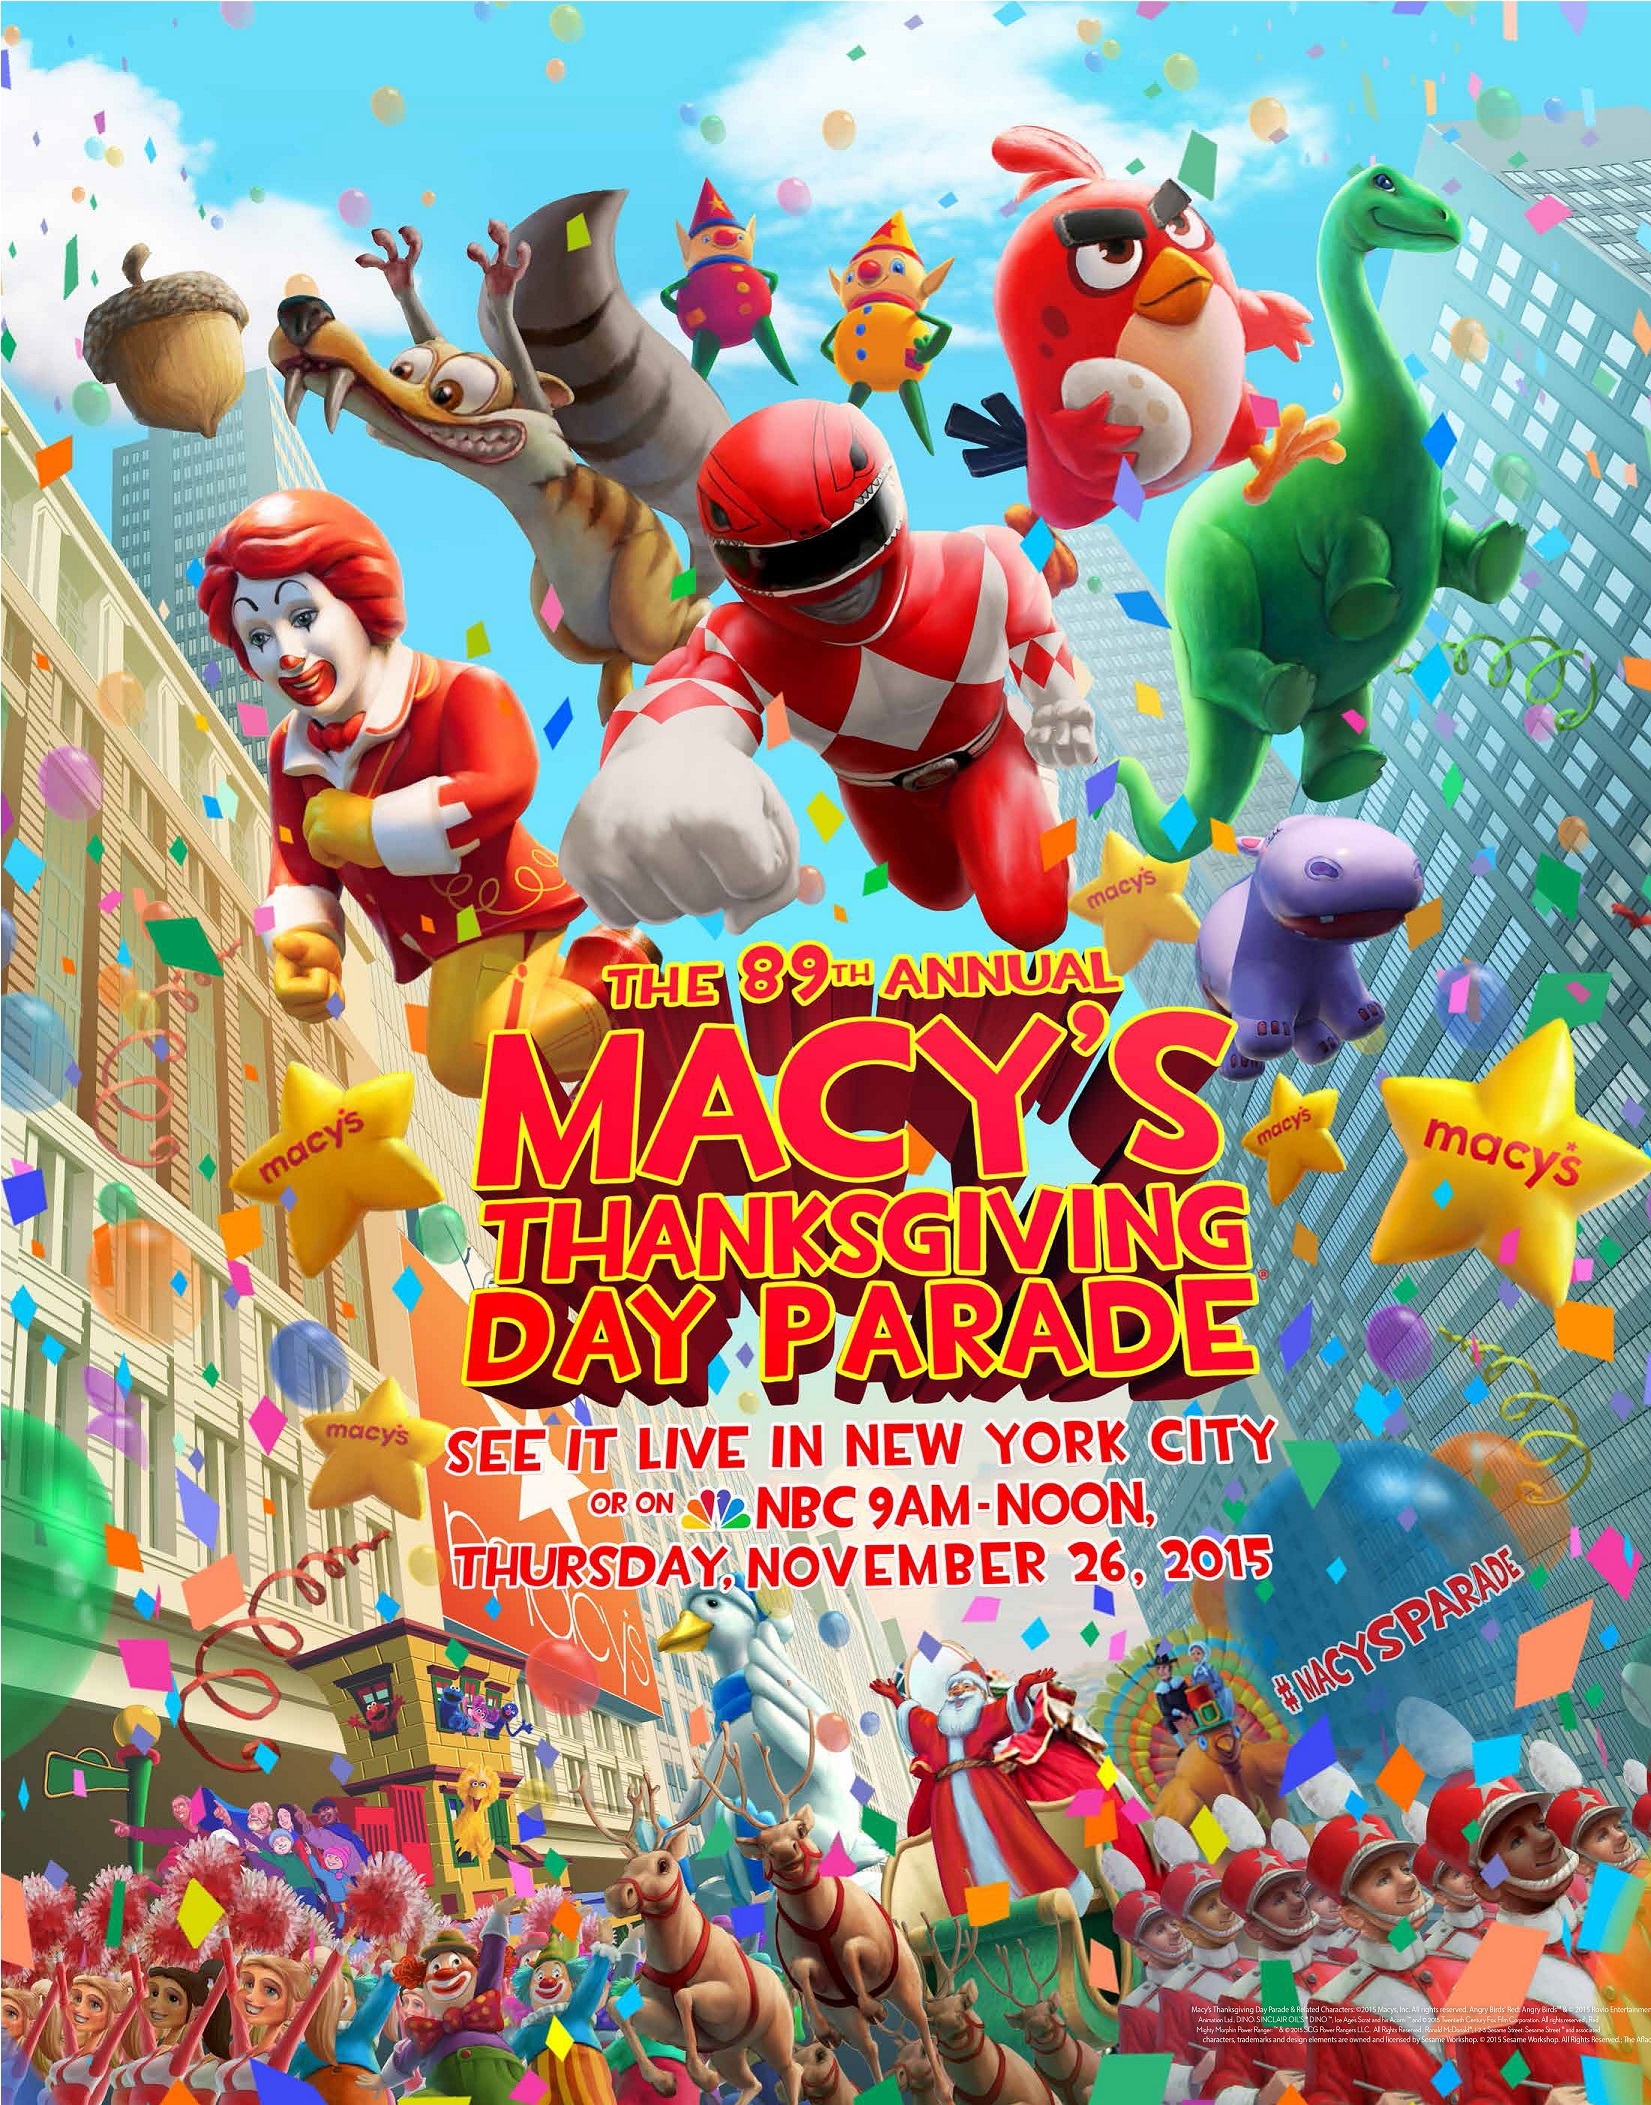 Macy's March of Magic | Business Wire